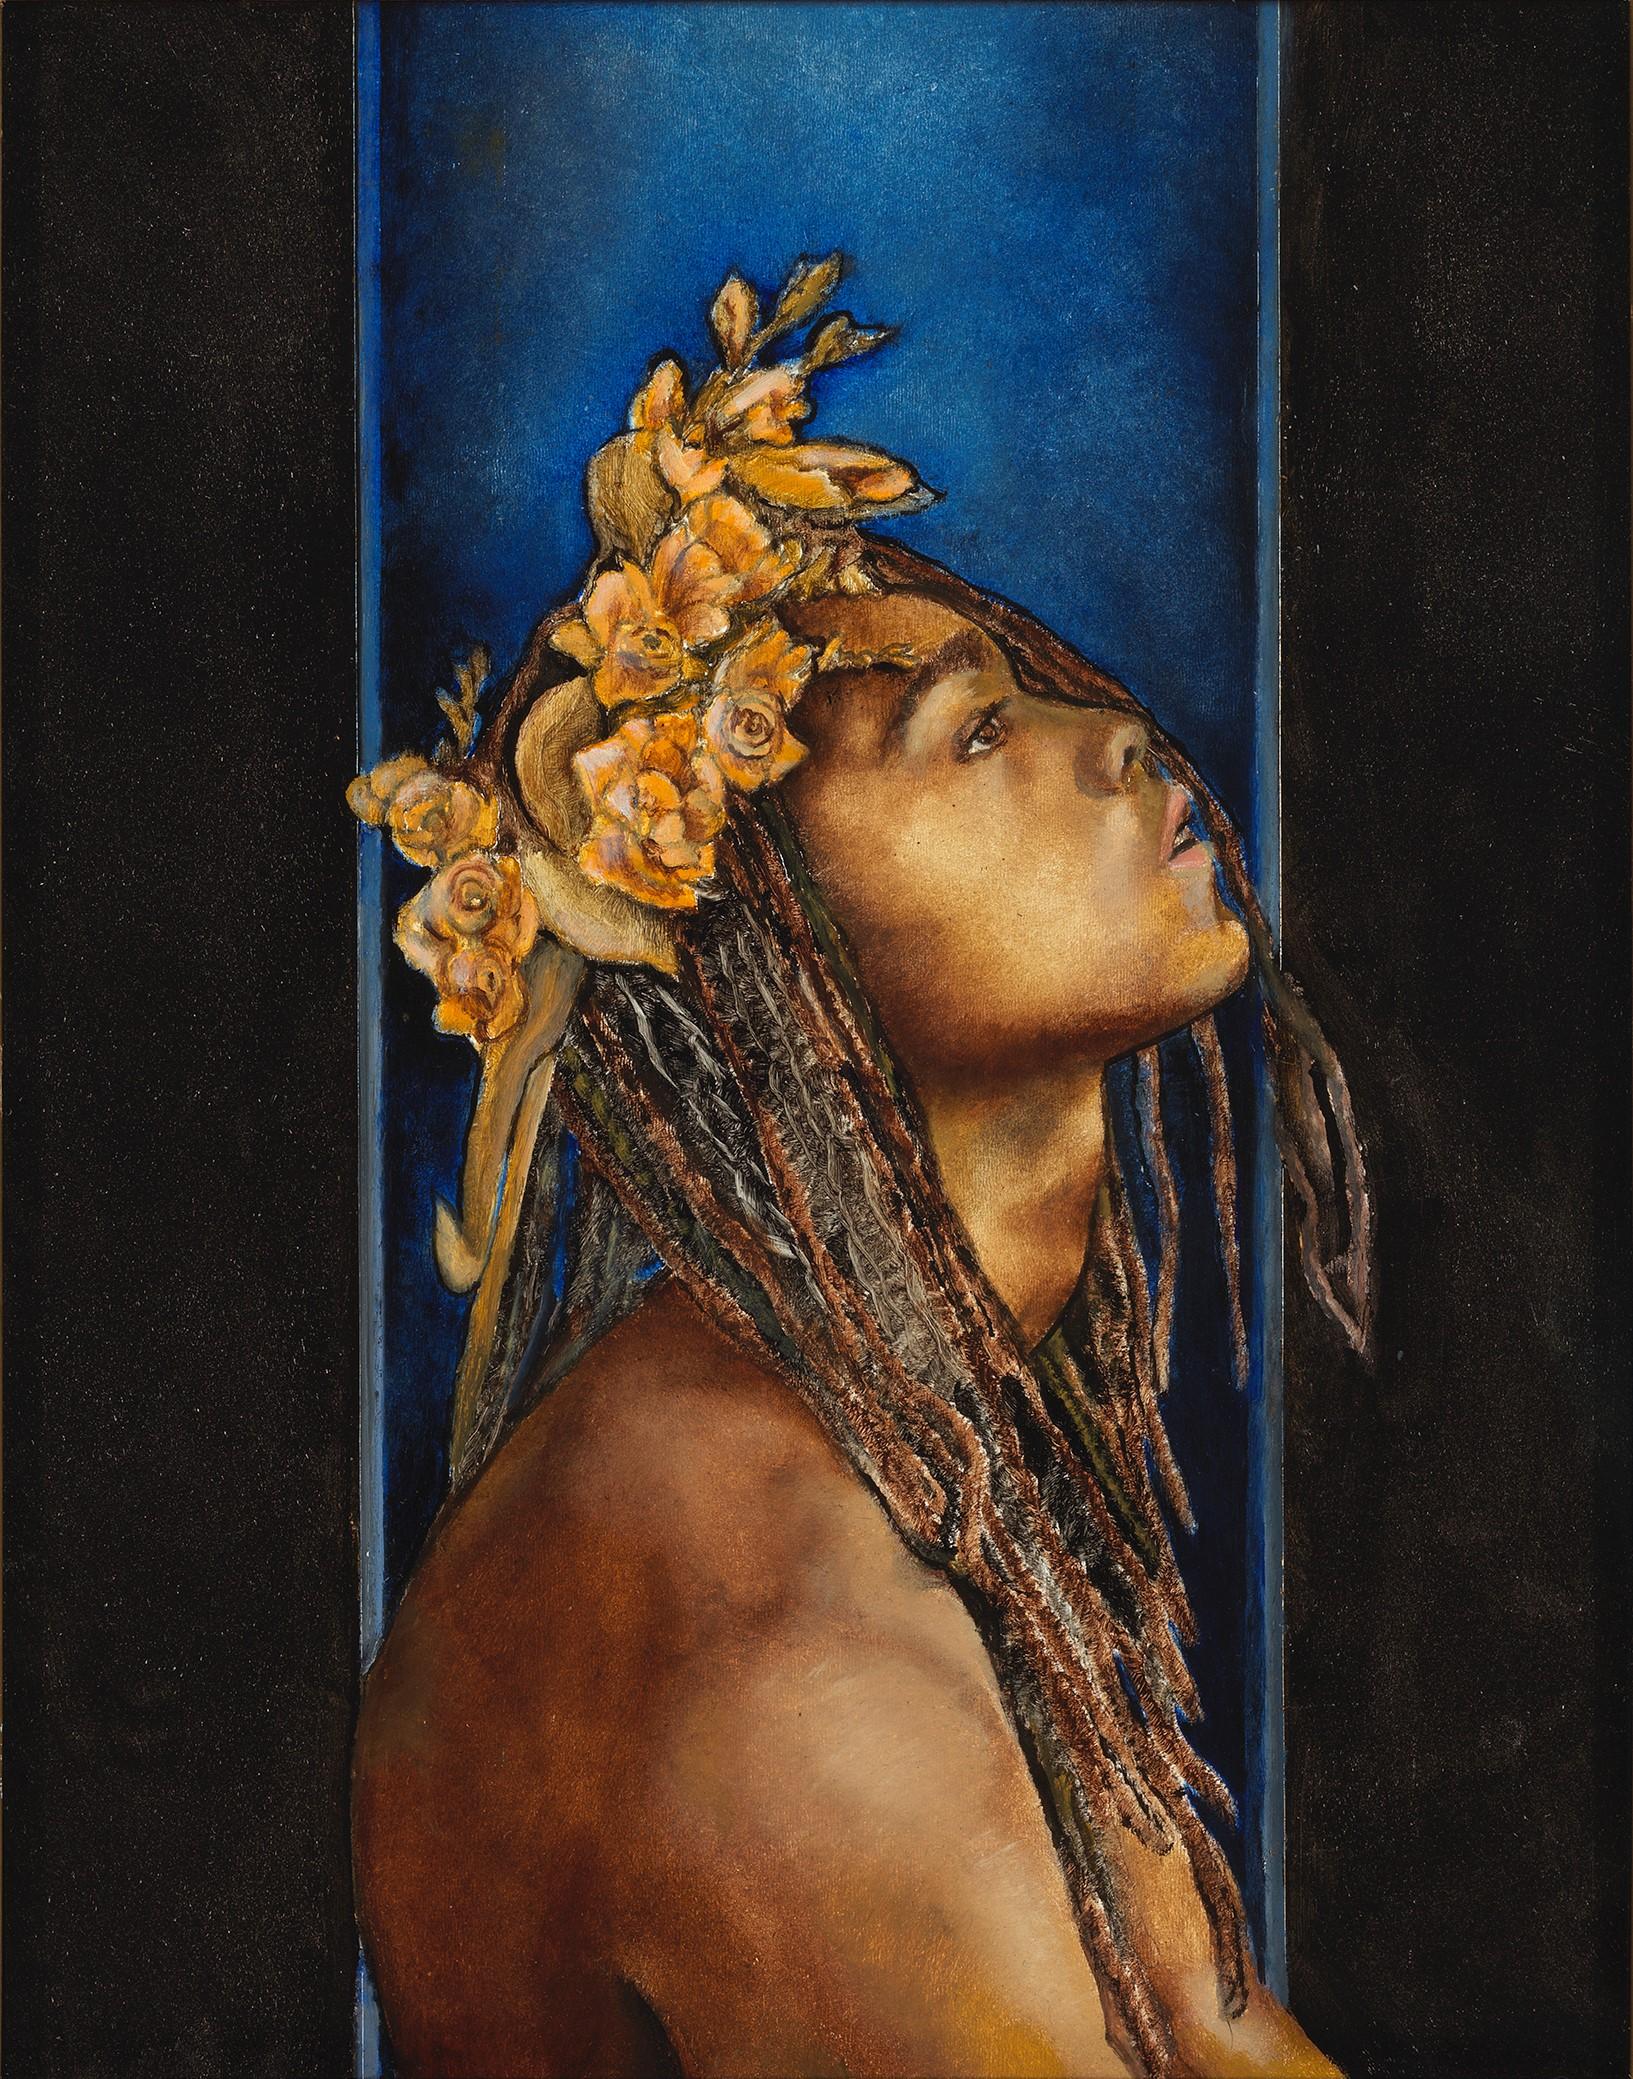 Eden - Male Nude Portrait with Dreadlocks on Navy Blue Background - Painting by Richard Gibbons